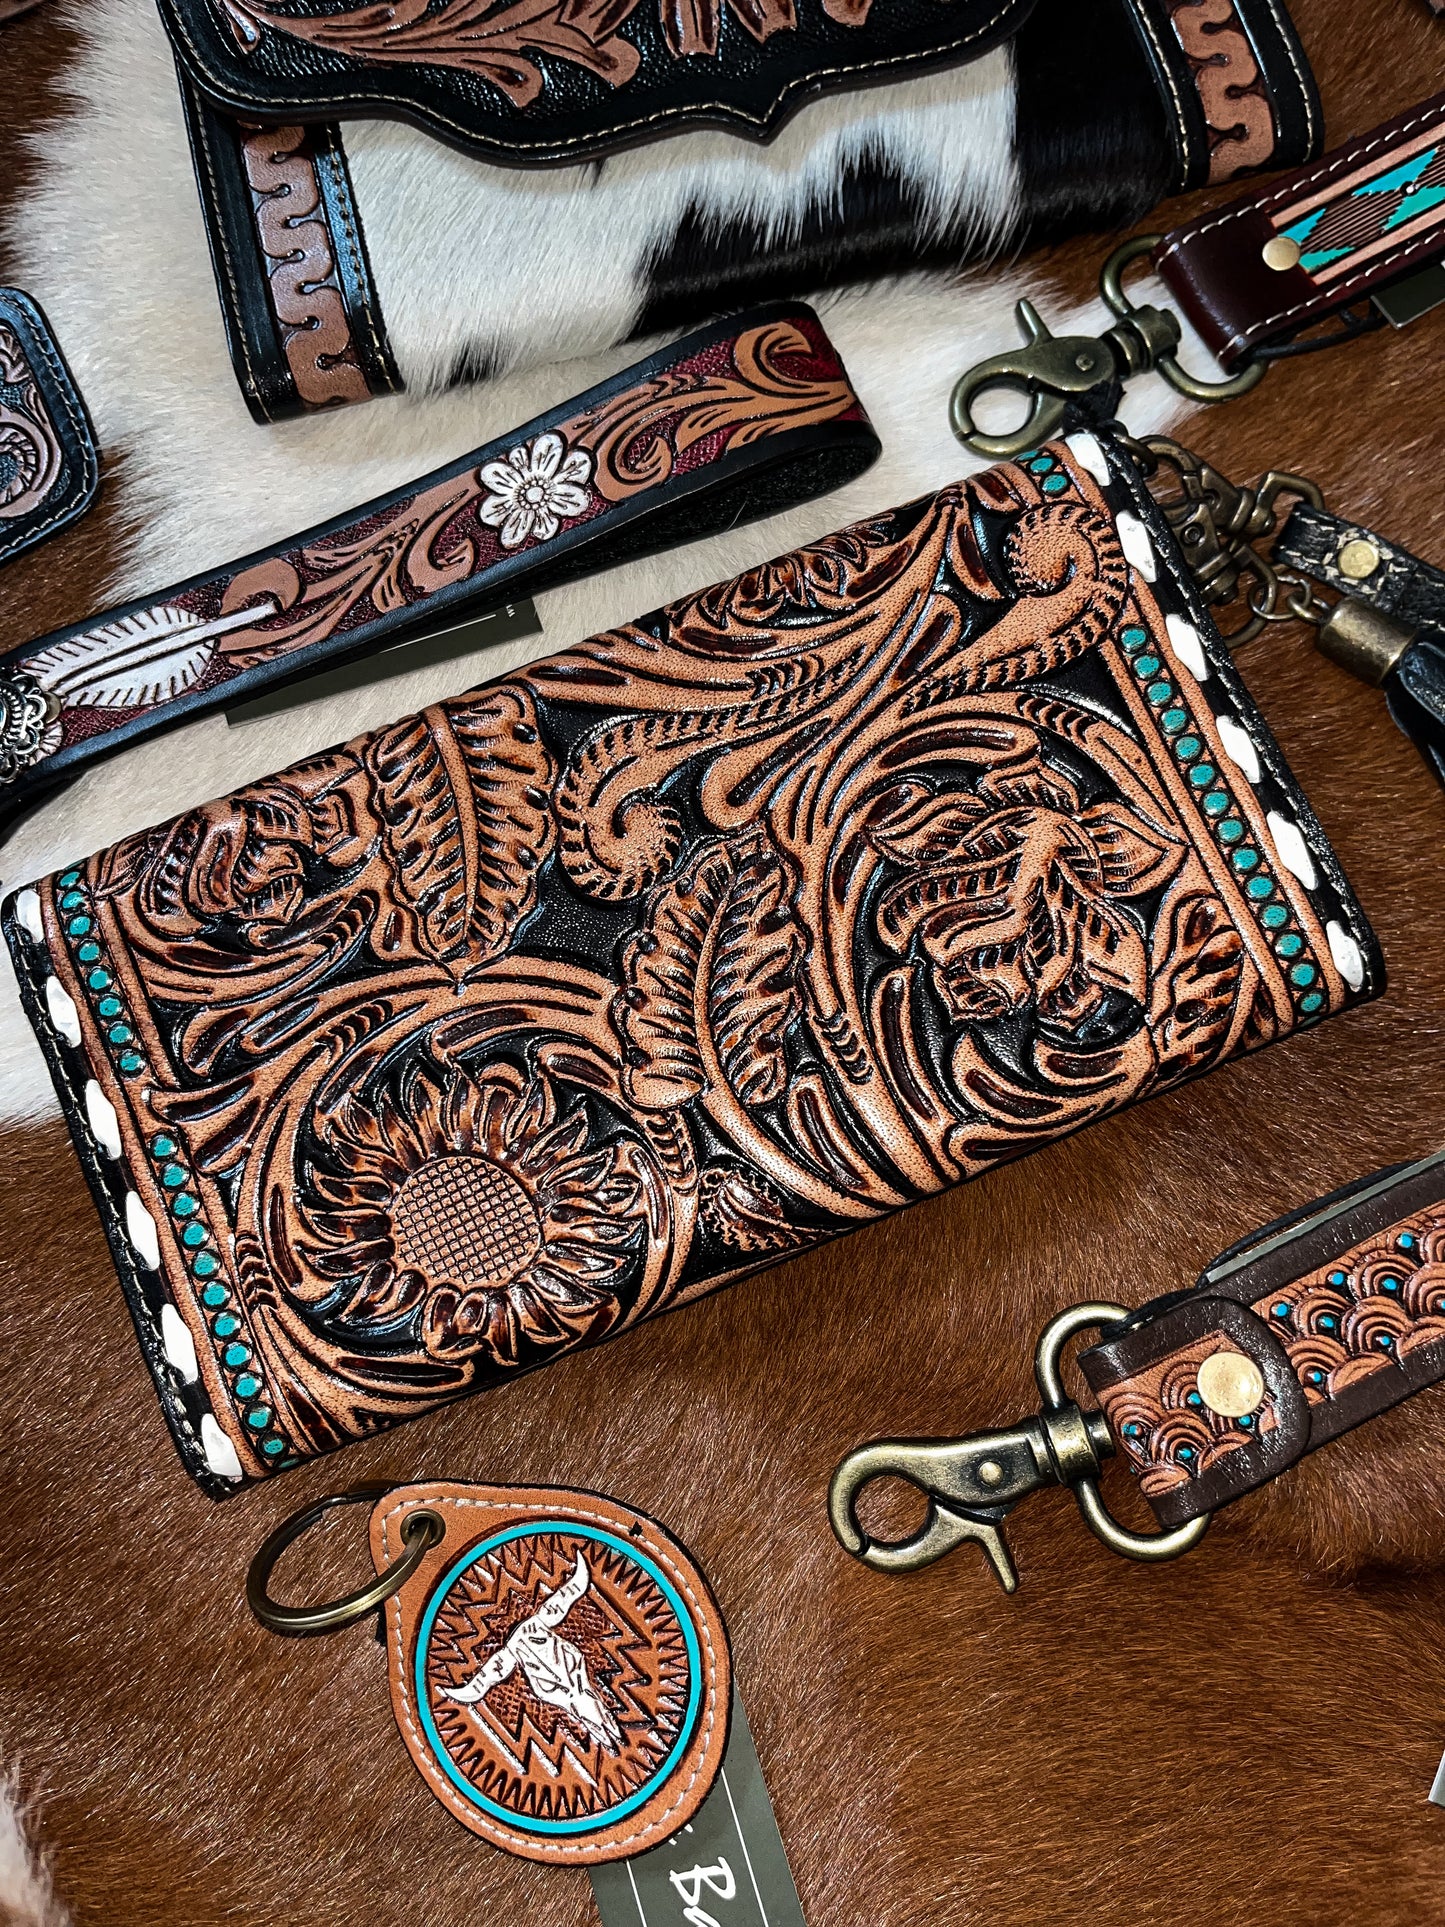 The Tooled Turquoise Wallet